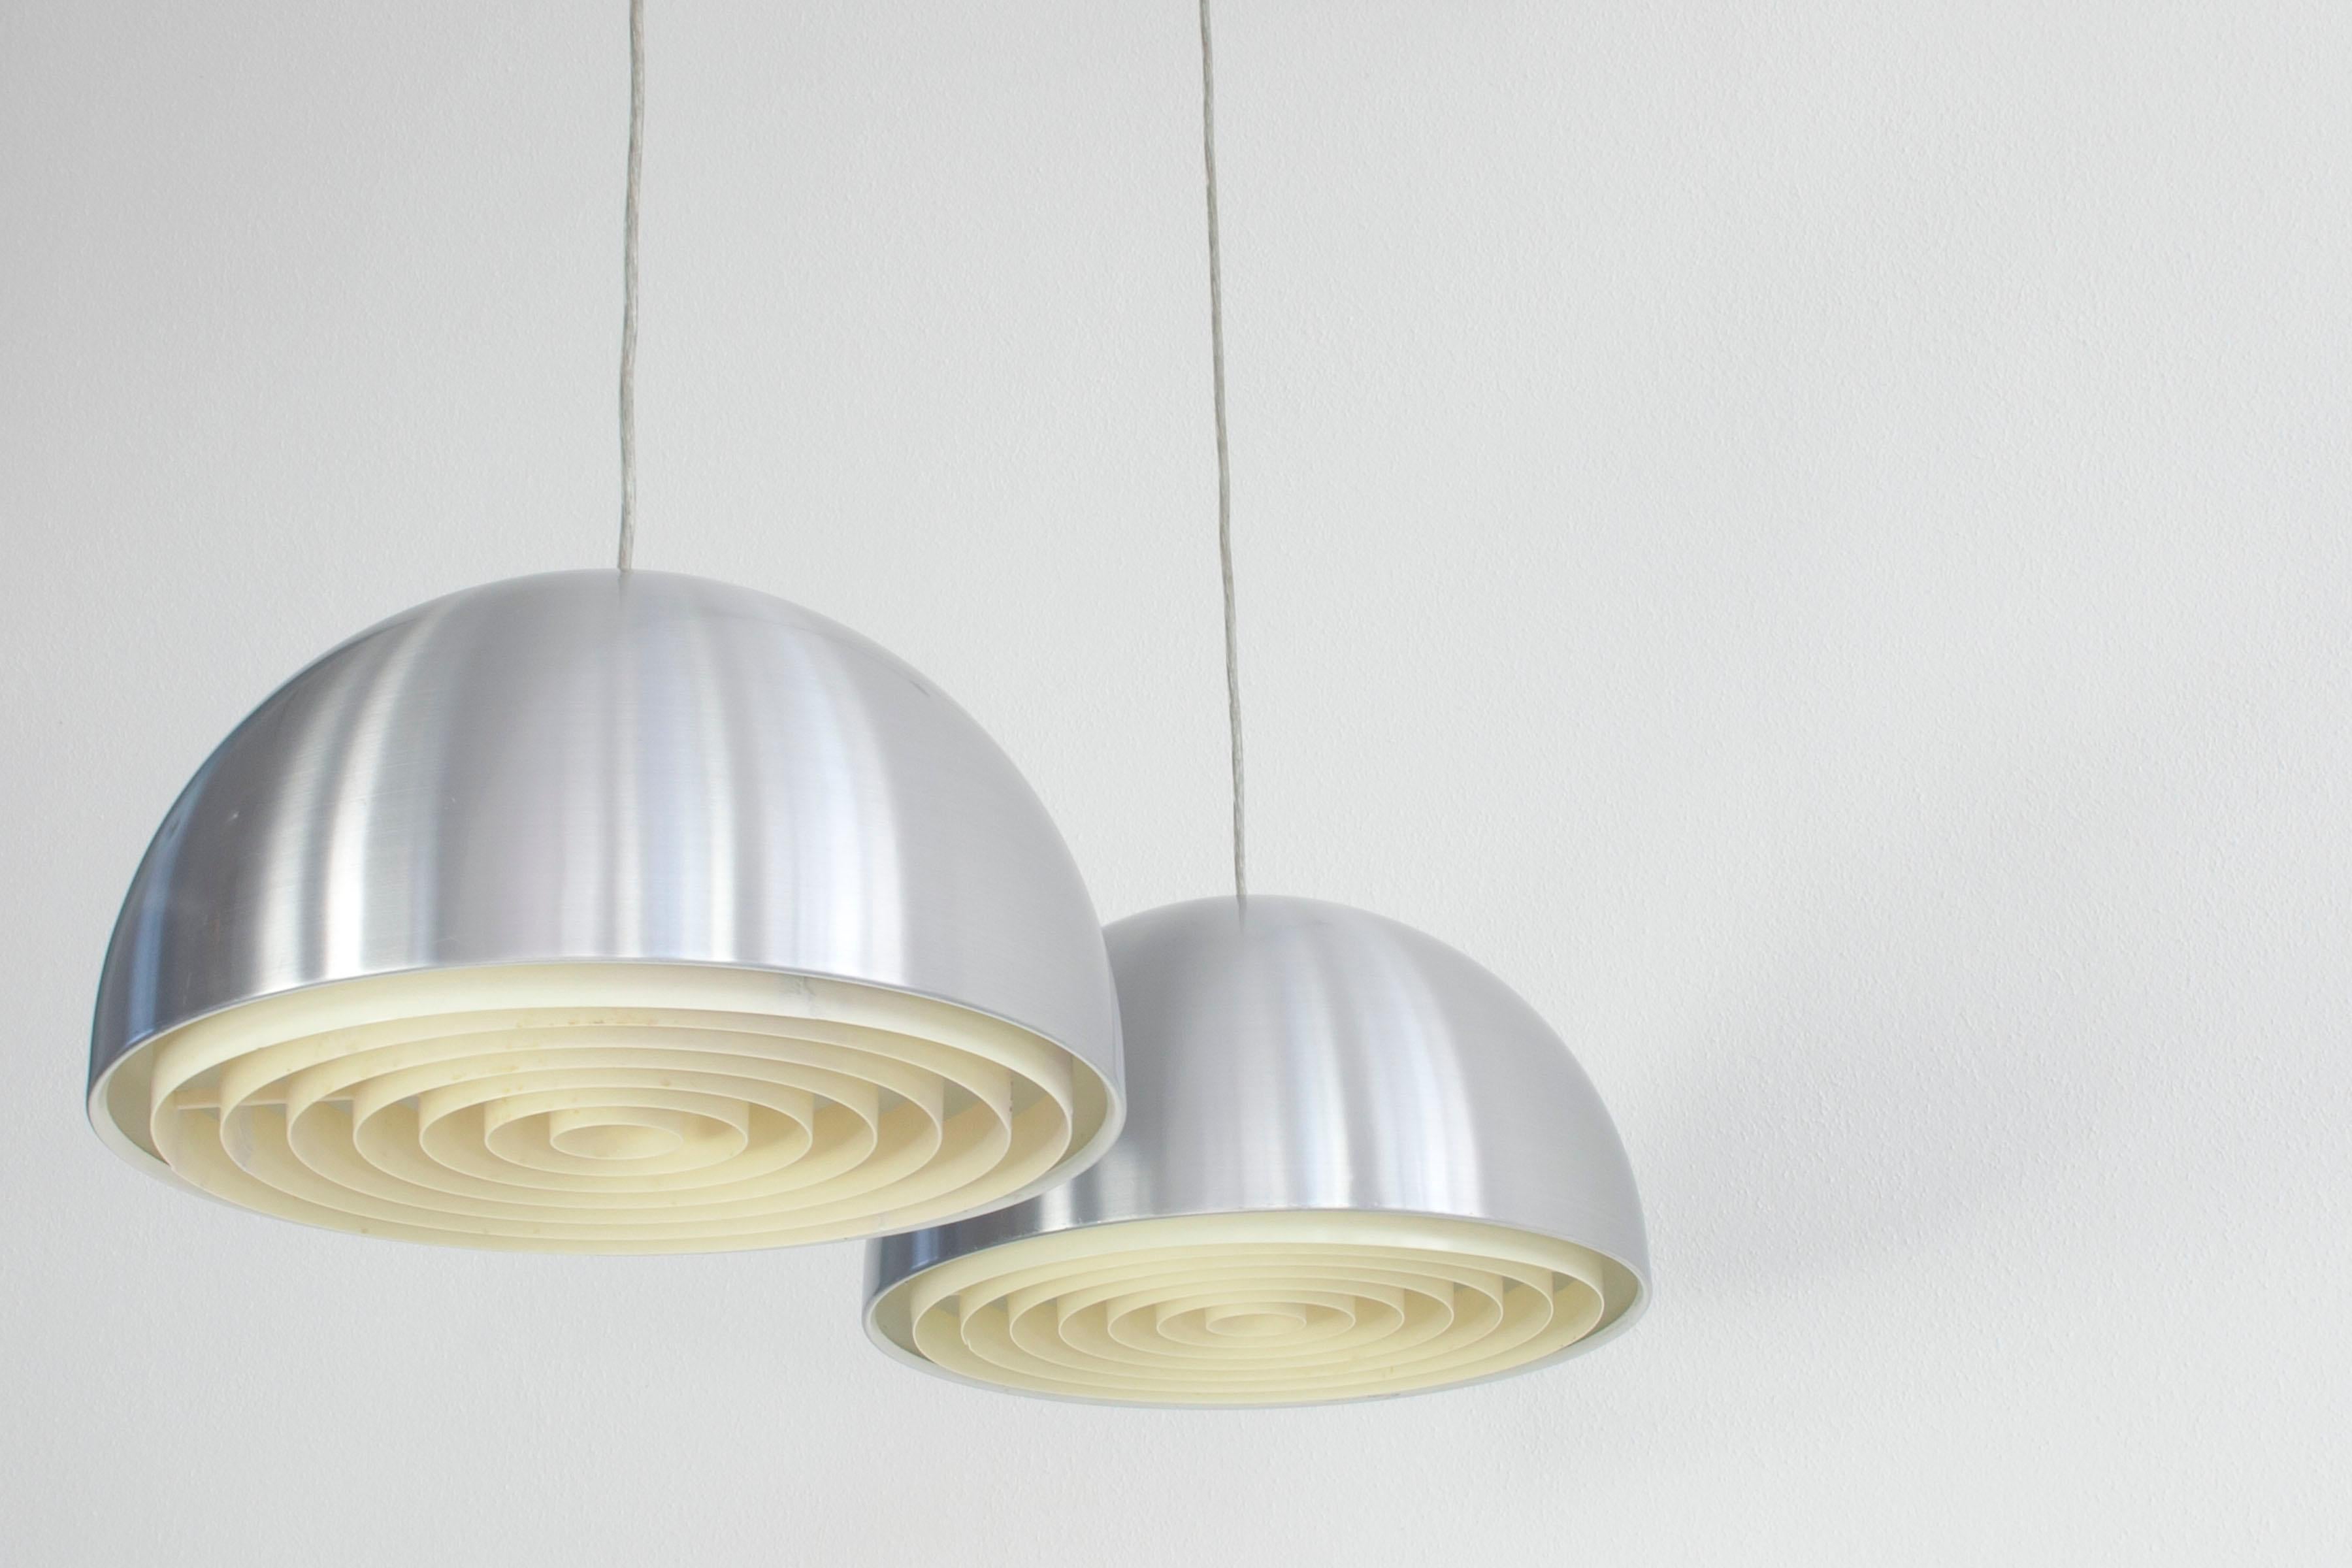 Set of 2 Lousiane hanging lamps by Vilhelm Wohlert for Poulsen, Denmark 1960s. The hemispherical shade is made of brushed aluminum with white plastic diffuser inside. The lamp is electrified with E27 thread. 